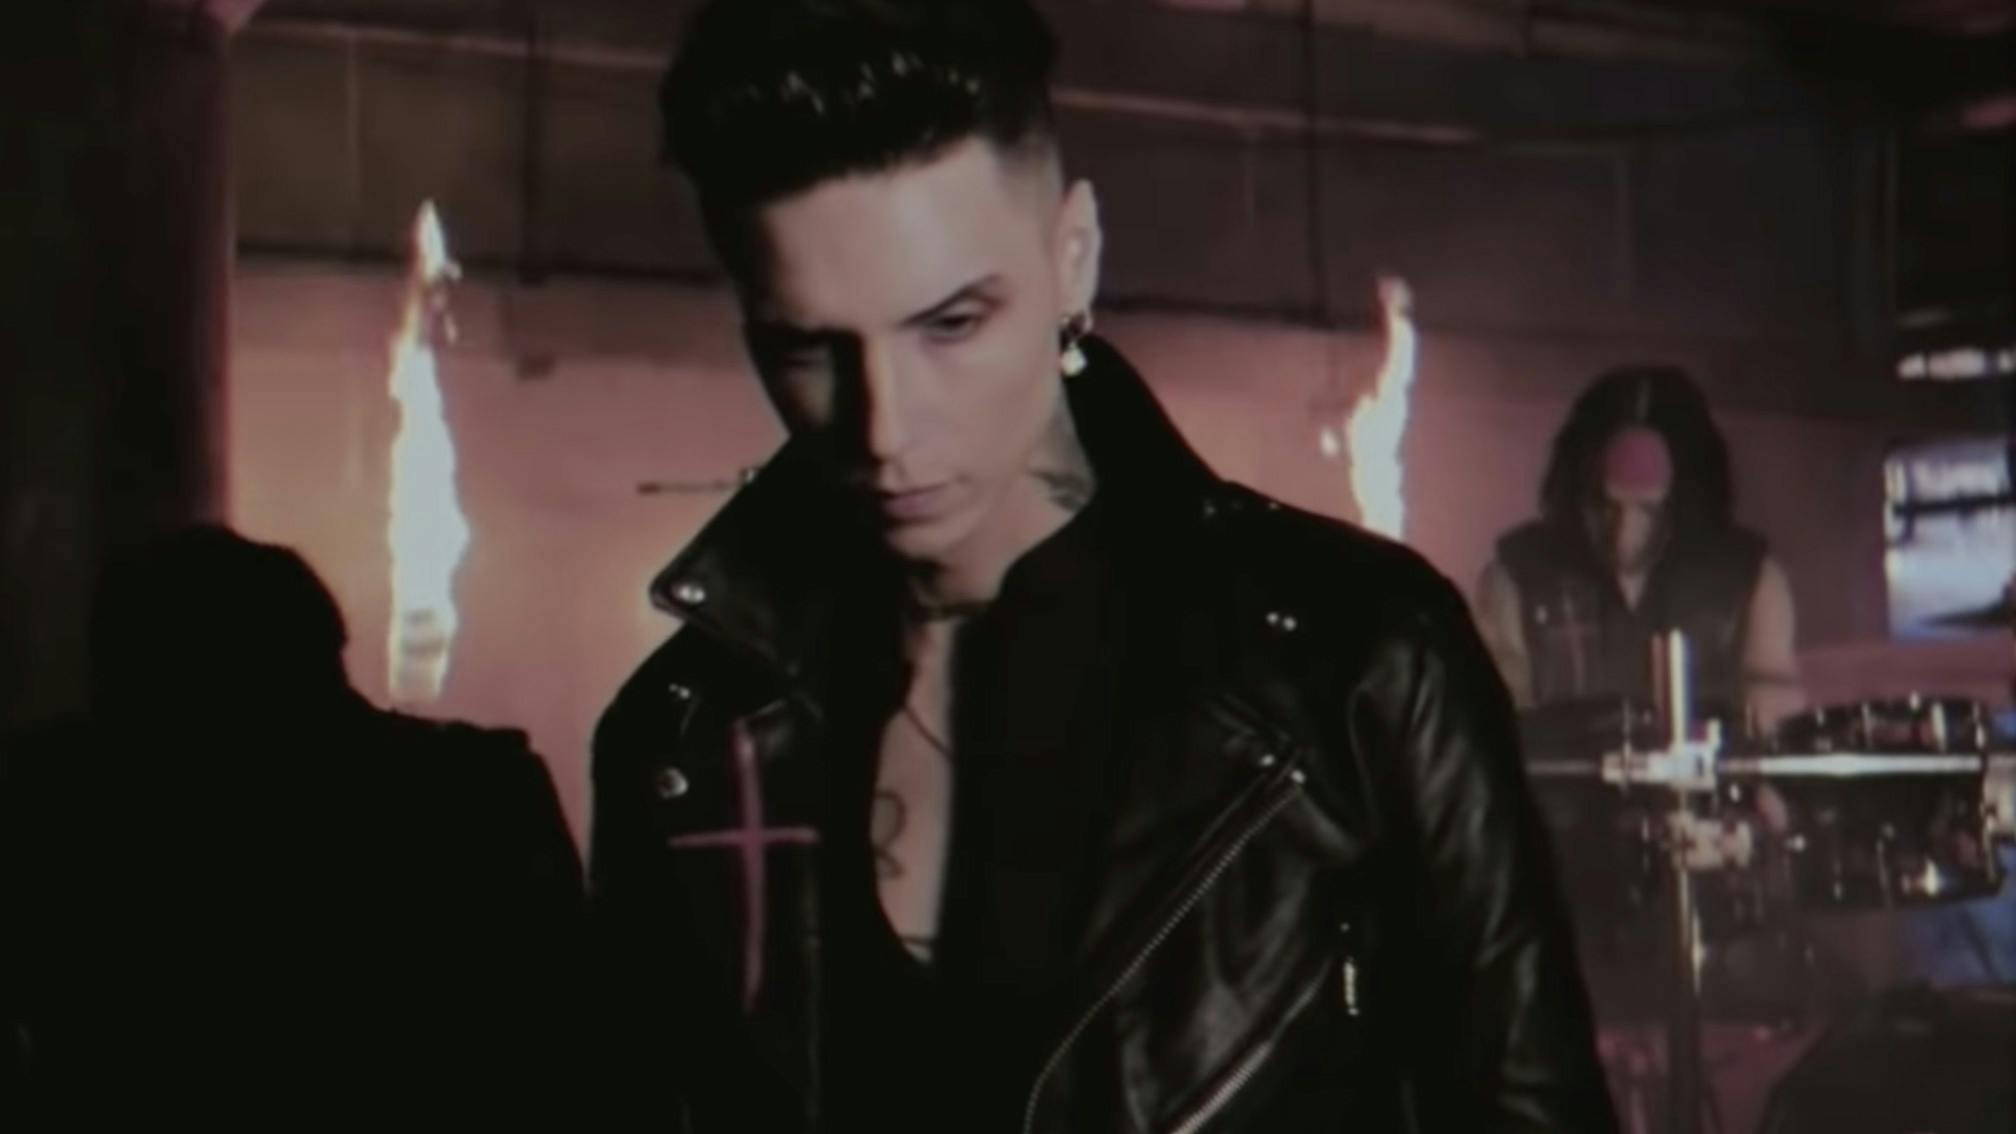 Black Veil Brides are teasing a new single and video, Fields Of Bone